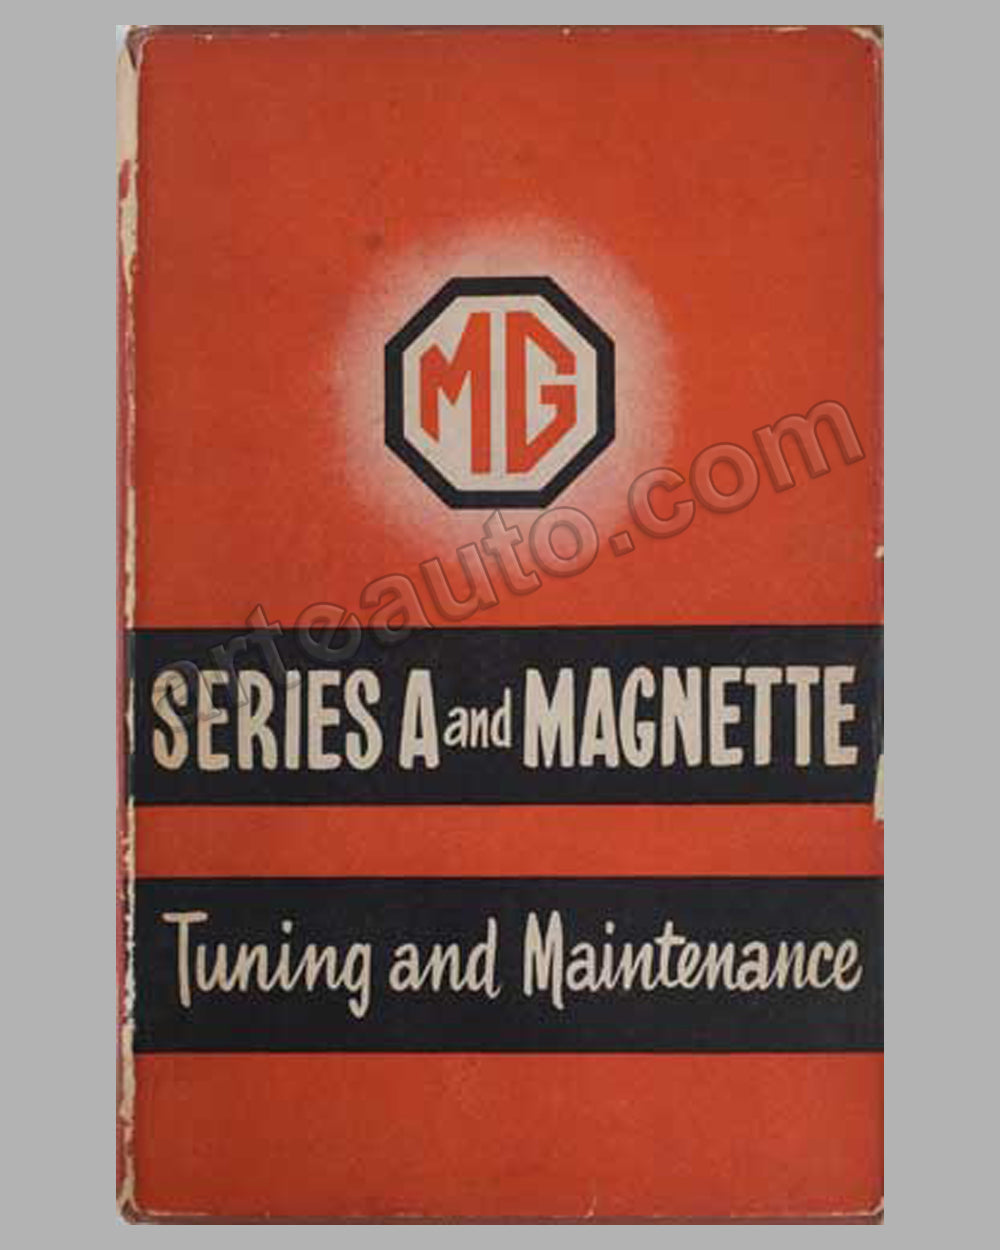 MG Series A & Magnette Tuning & Maintenance book by P. Smith